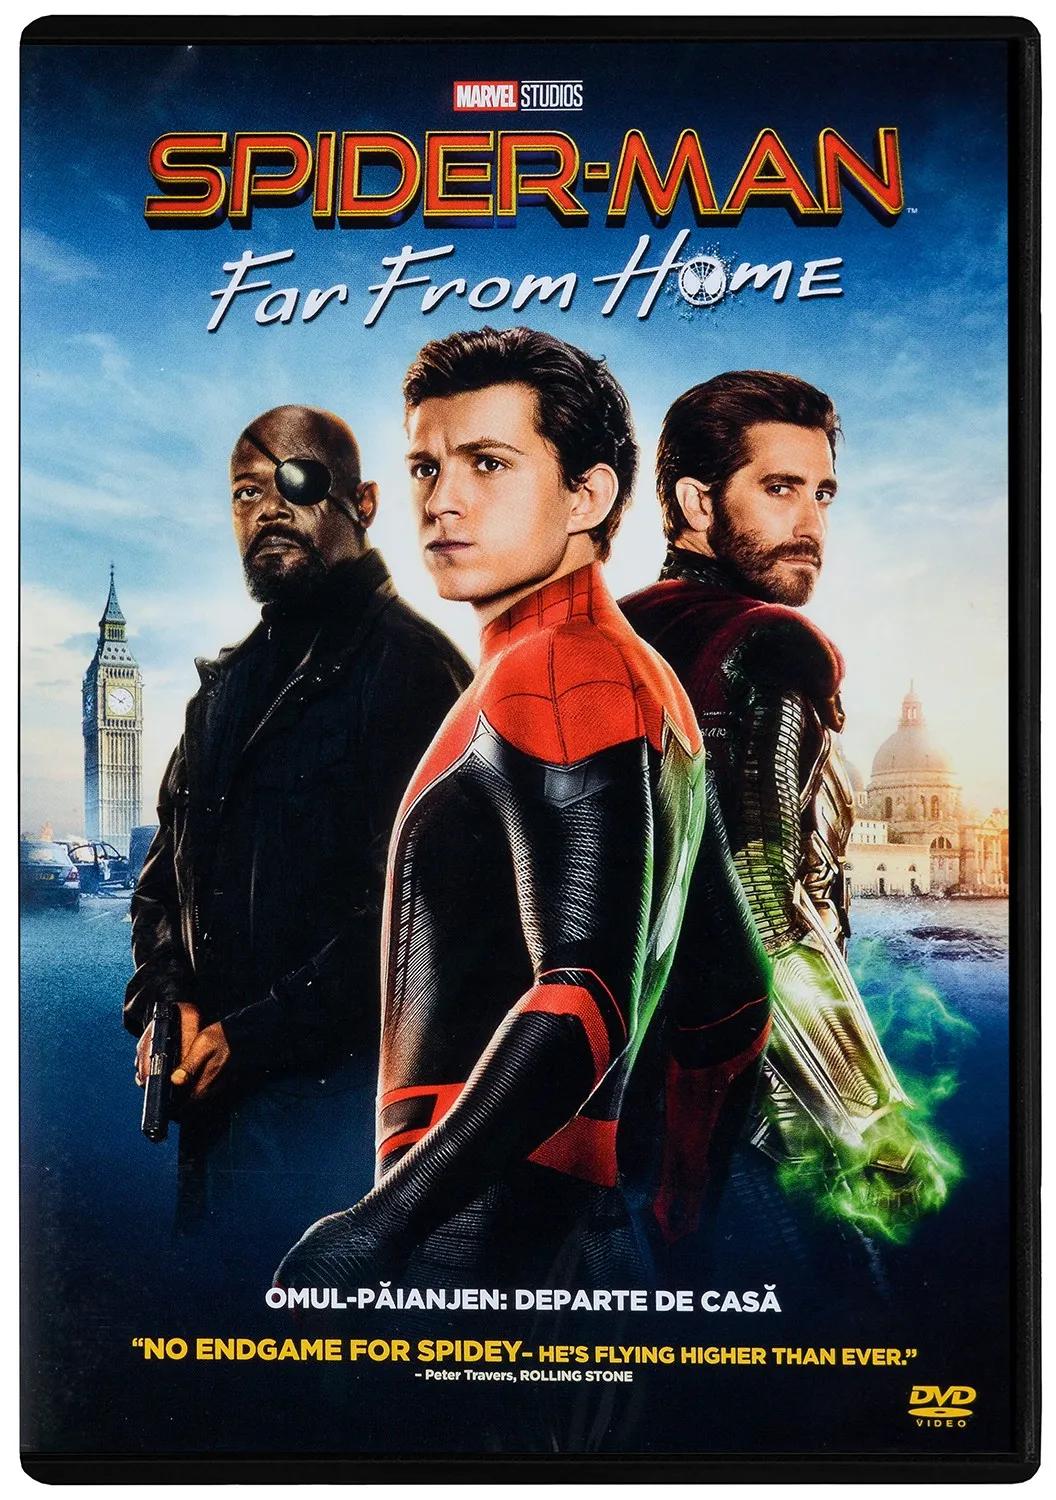 Spider-Man: Far from Home / Спайдър-мен: Далече от дома (2019)